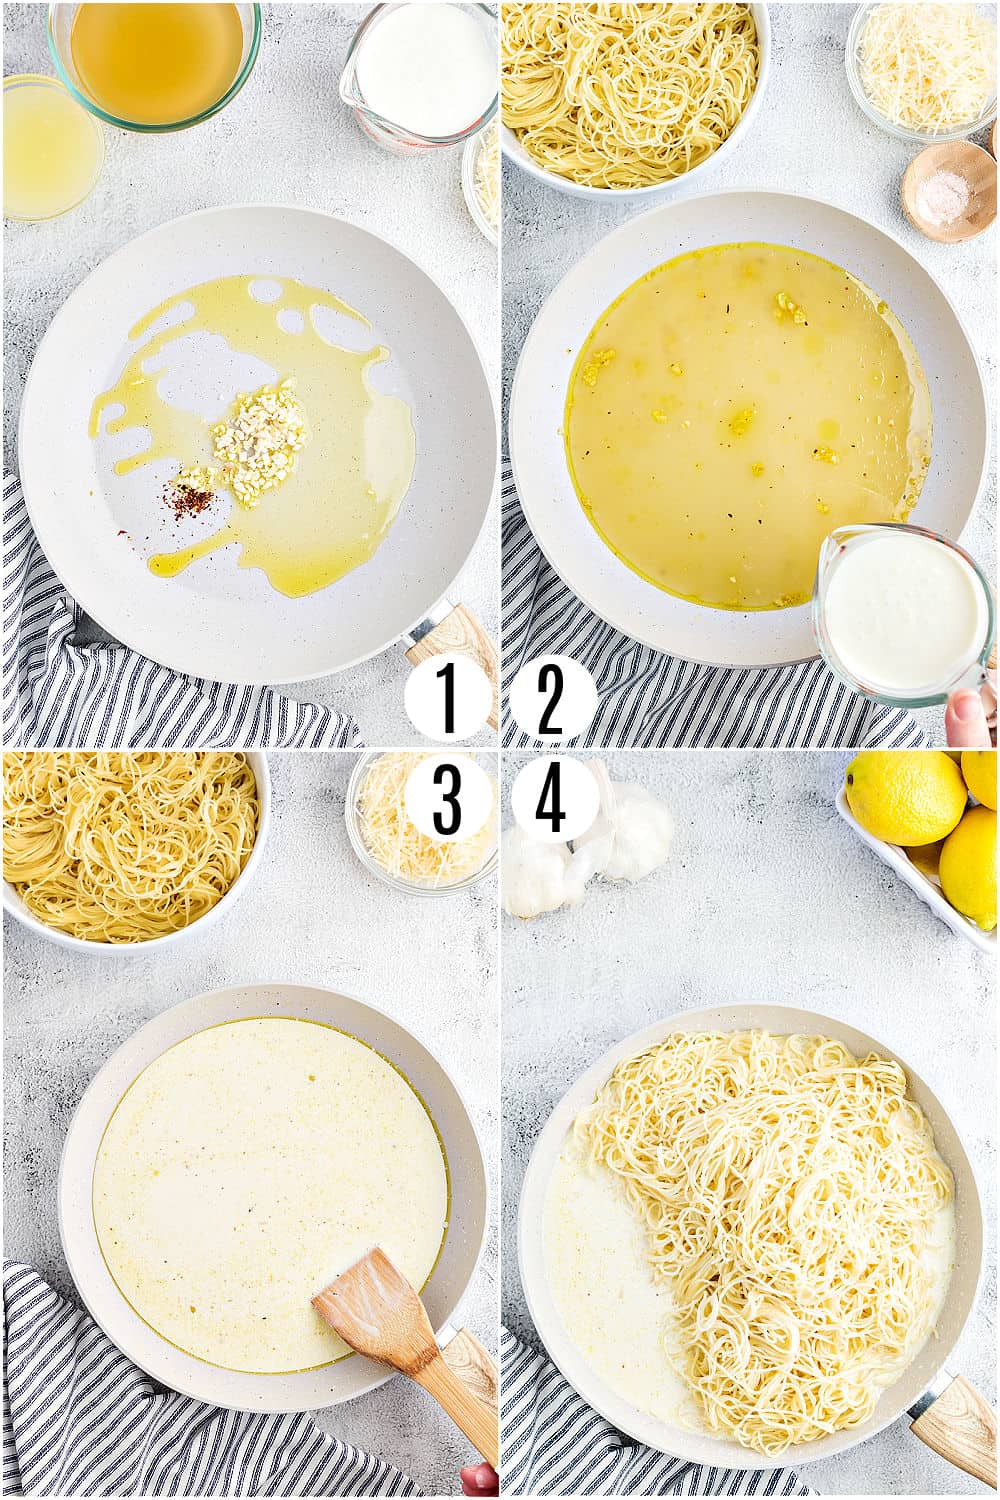 Step by step photos showing how to make lemon pasta.